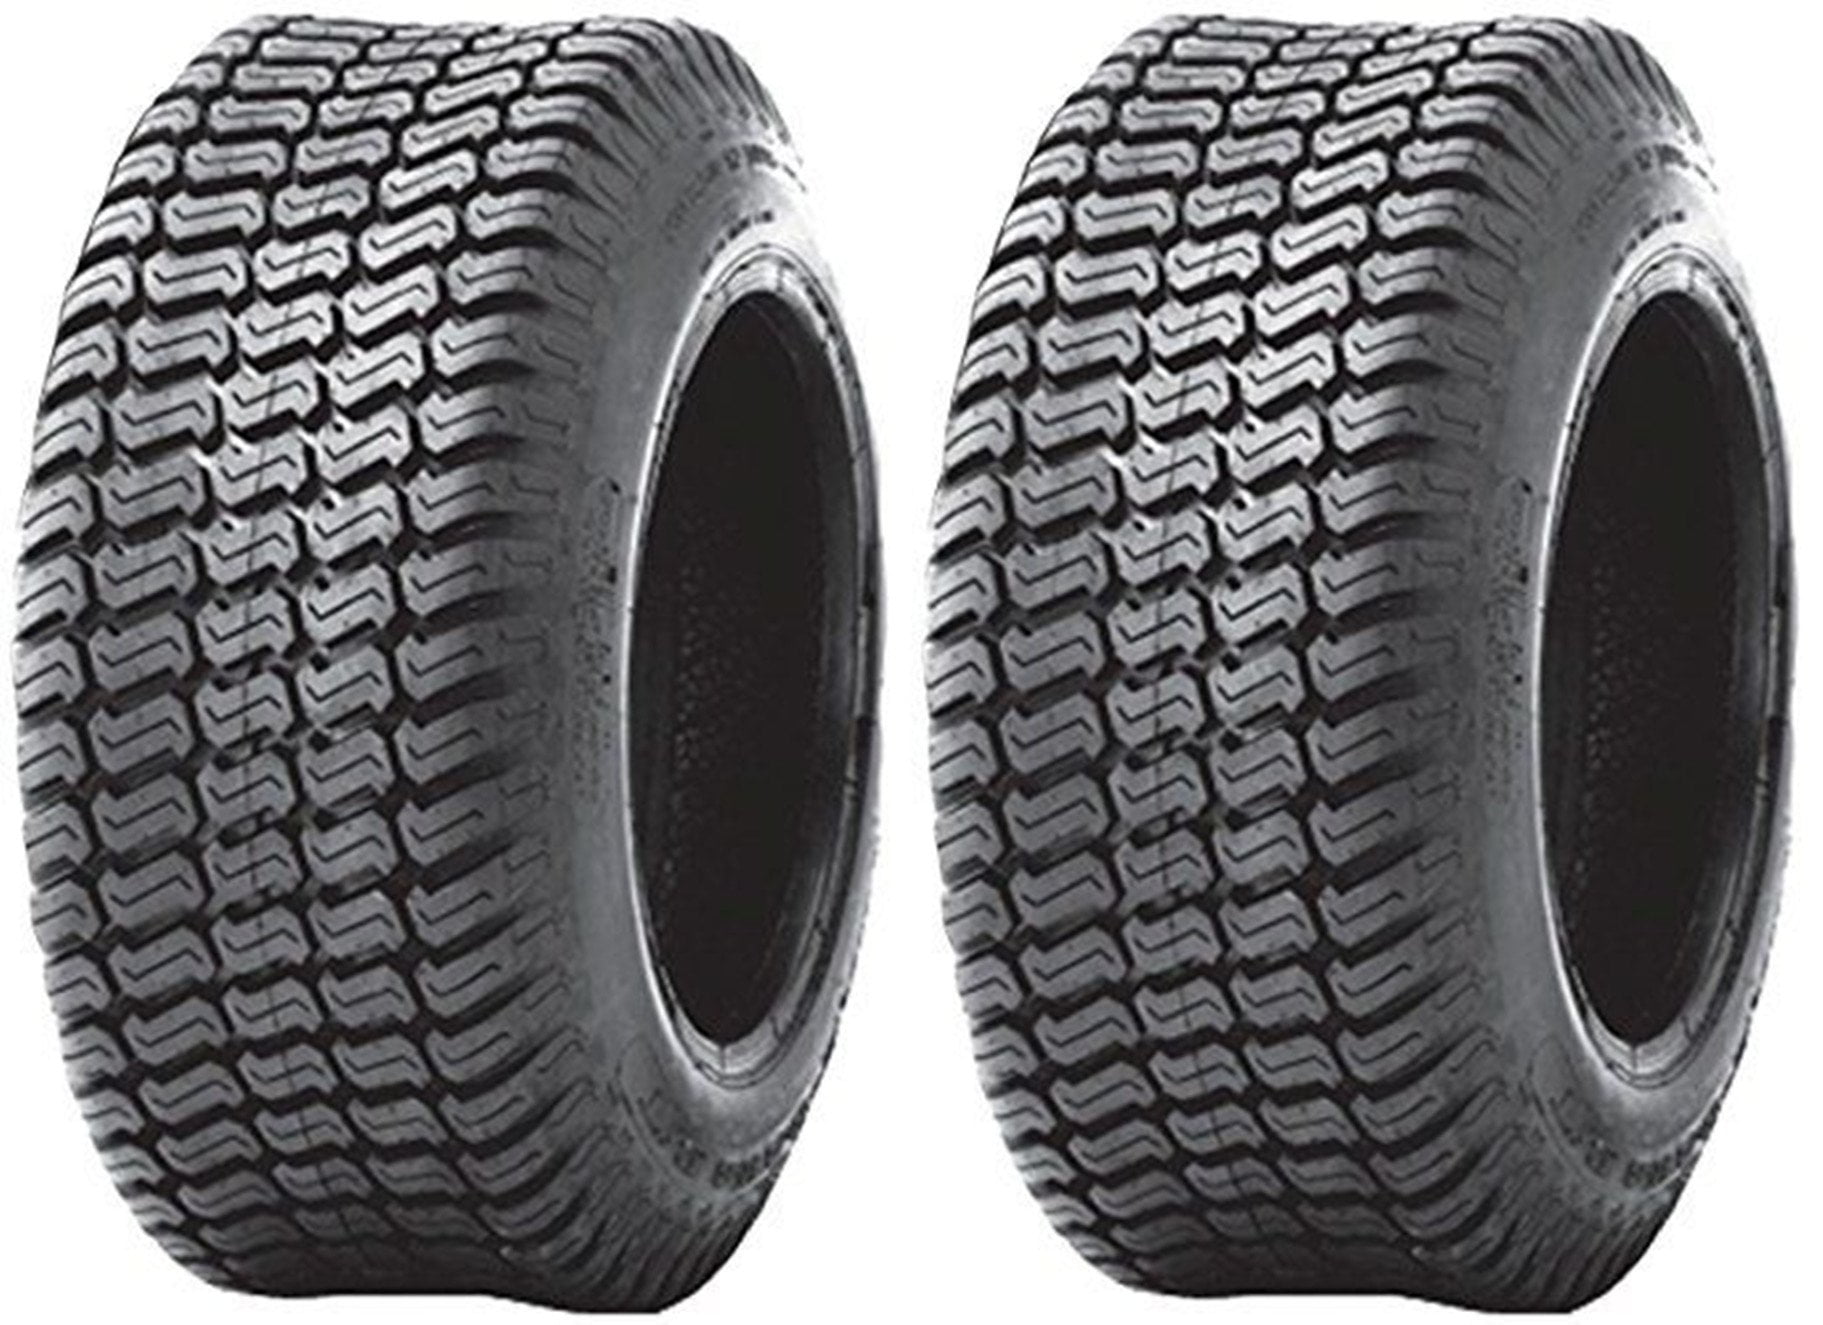 Airloc Brand 6 13x6.50-6 13x6.50x6 Tubeless Turf Tires 4 ply Rated Lot of 2 